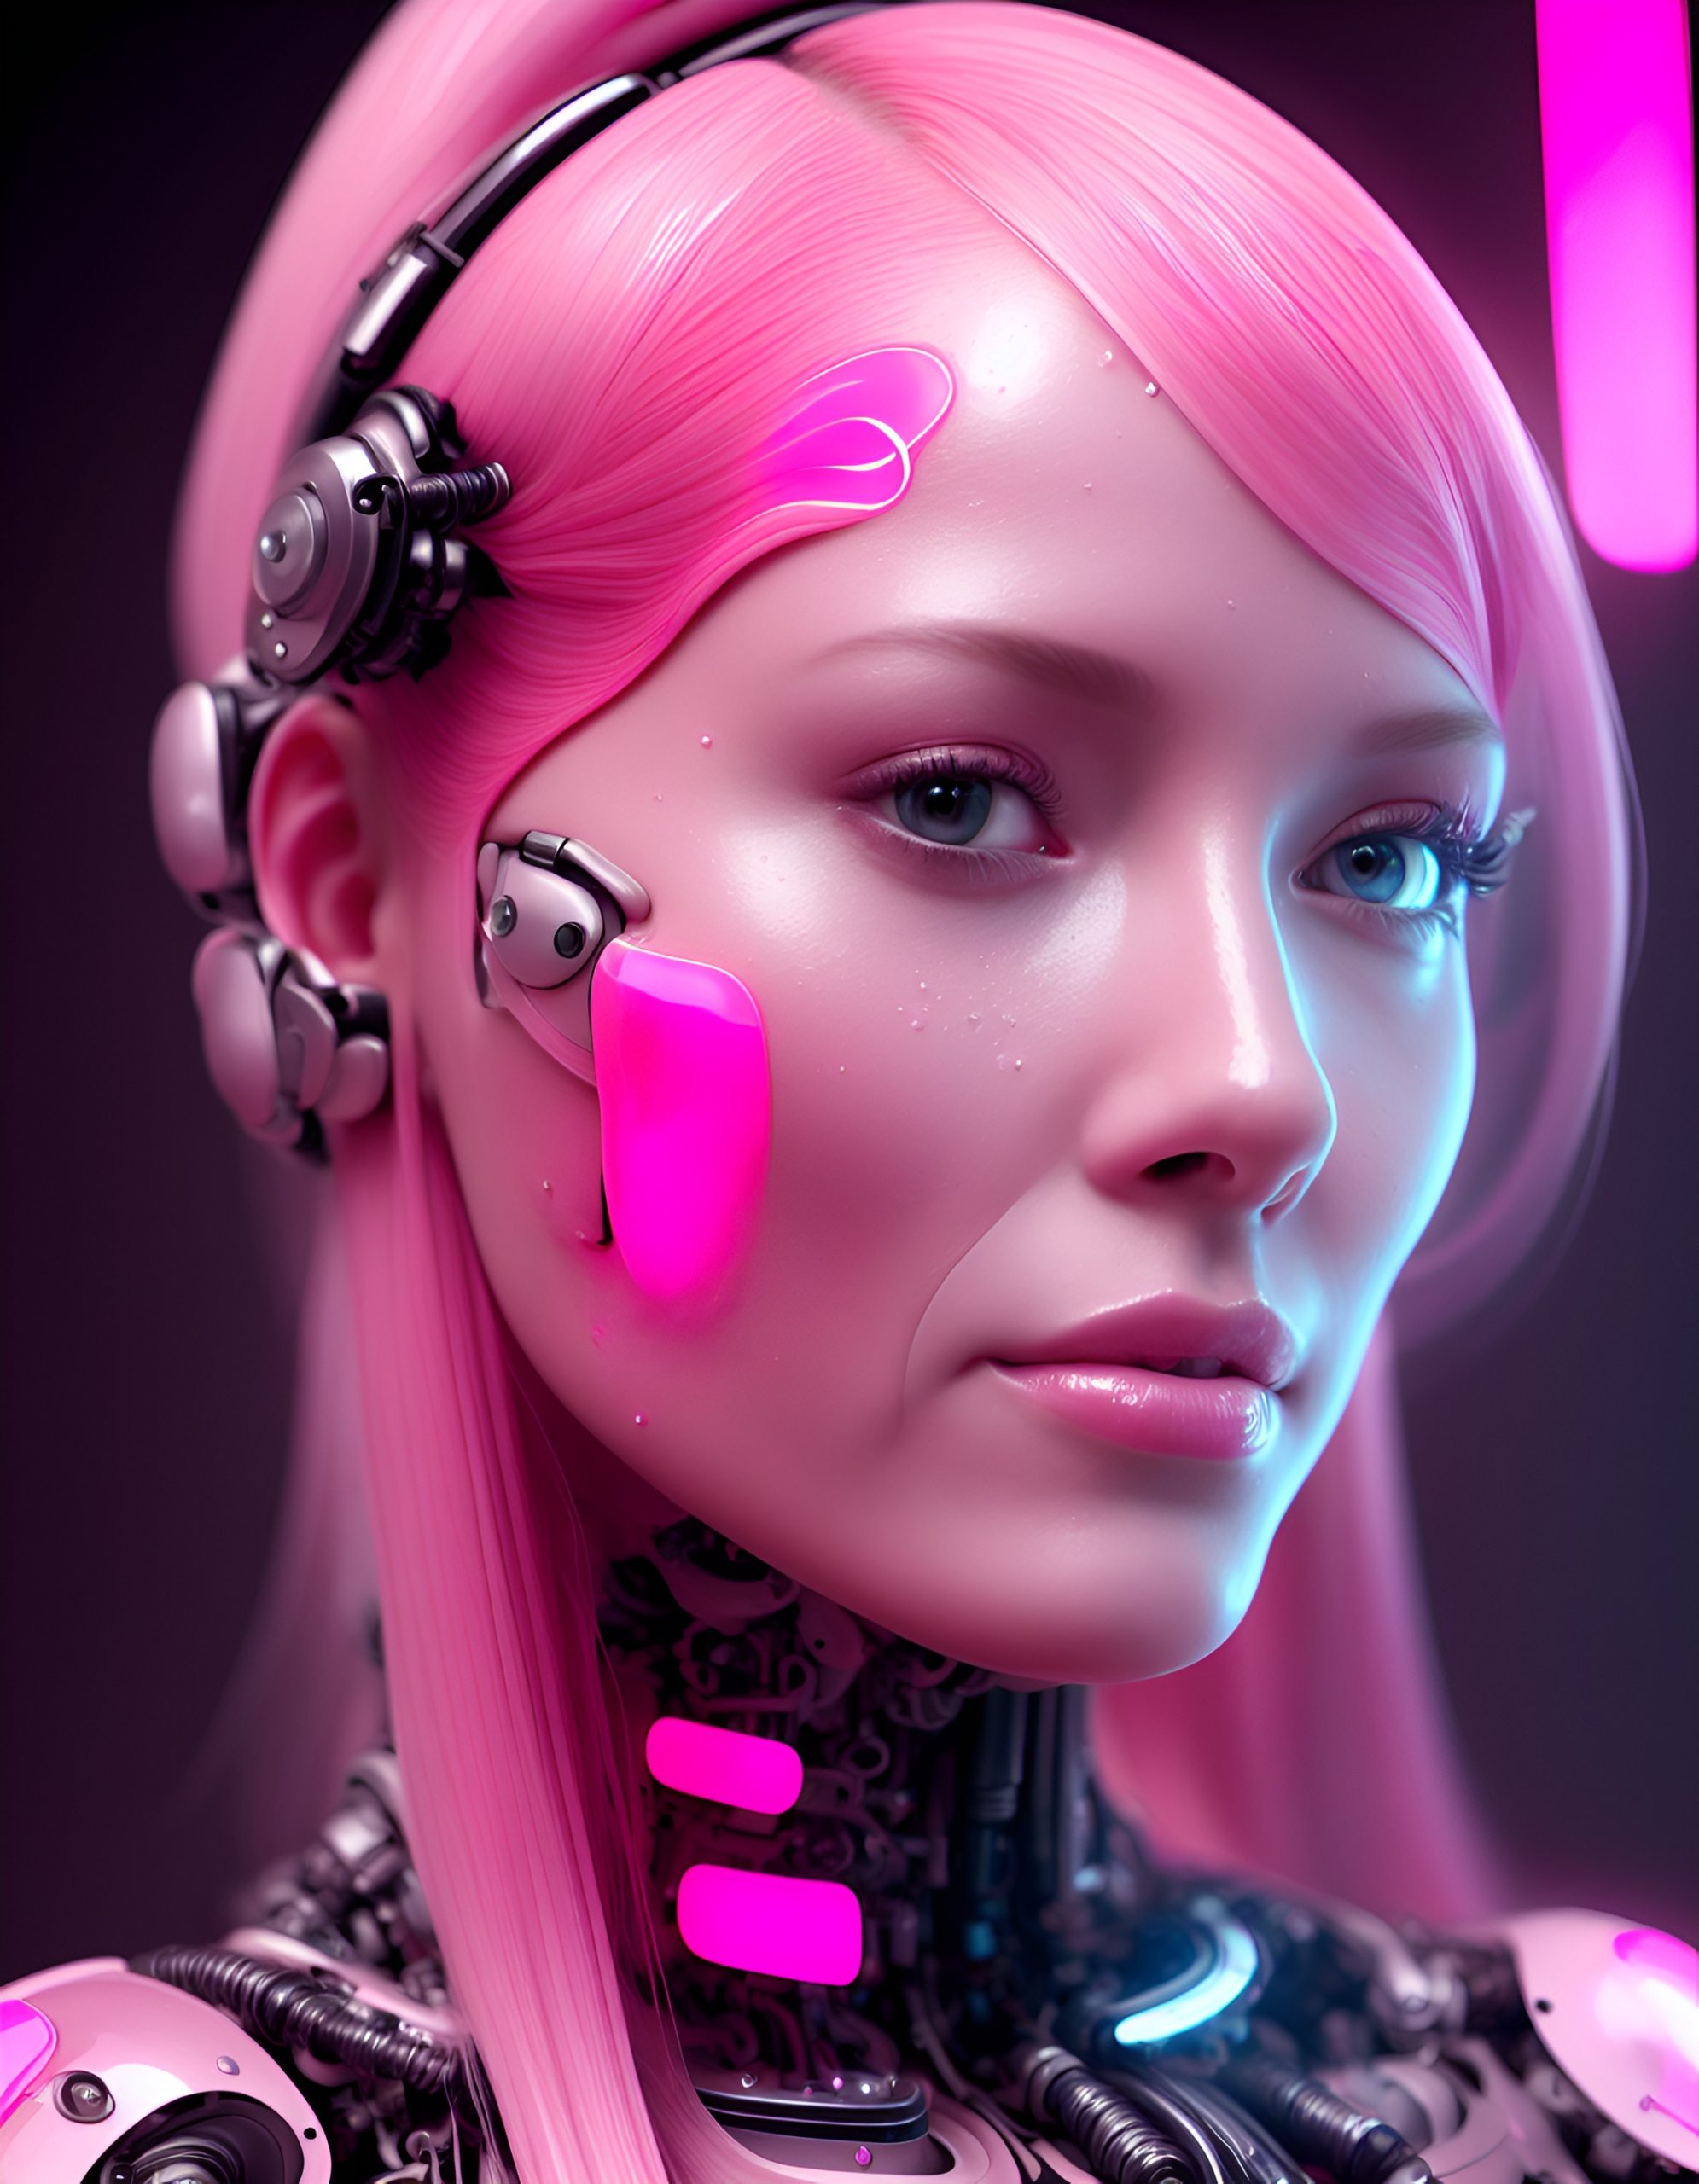 Default beautiful woman a cyborg woman 38years old pink gel lighting 2 93d9119e 3bbb 4e73 9a45 ac4d0fdf73a4 1 scaled